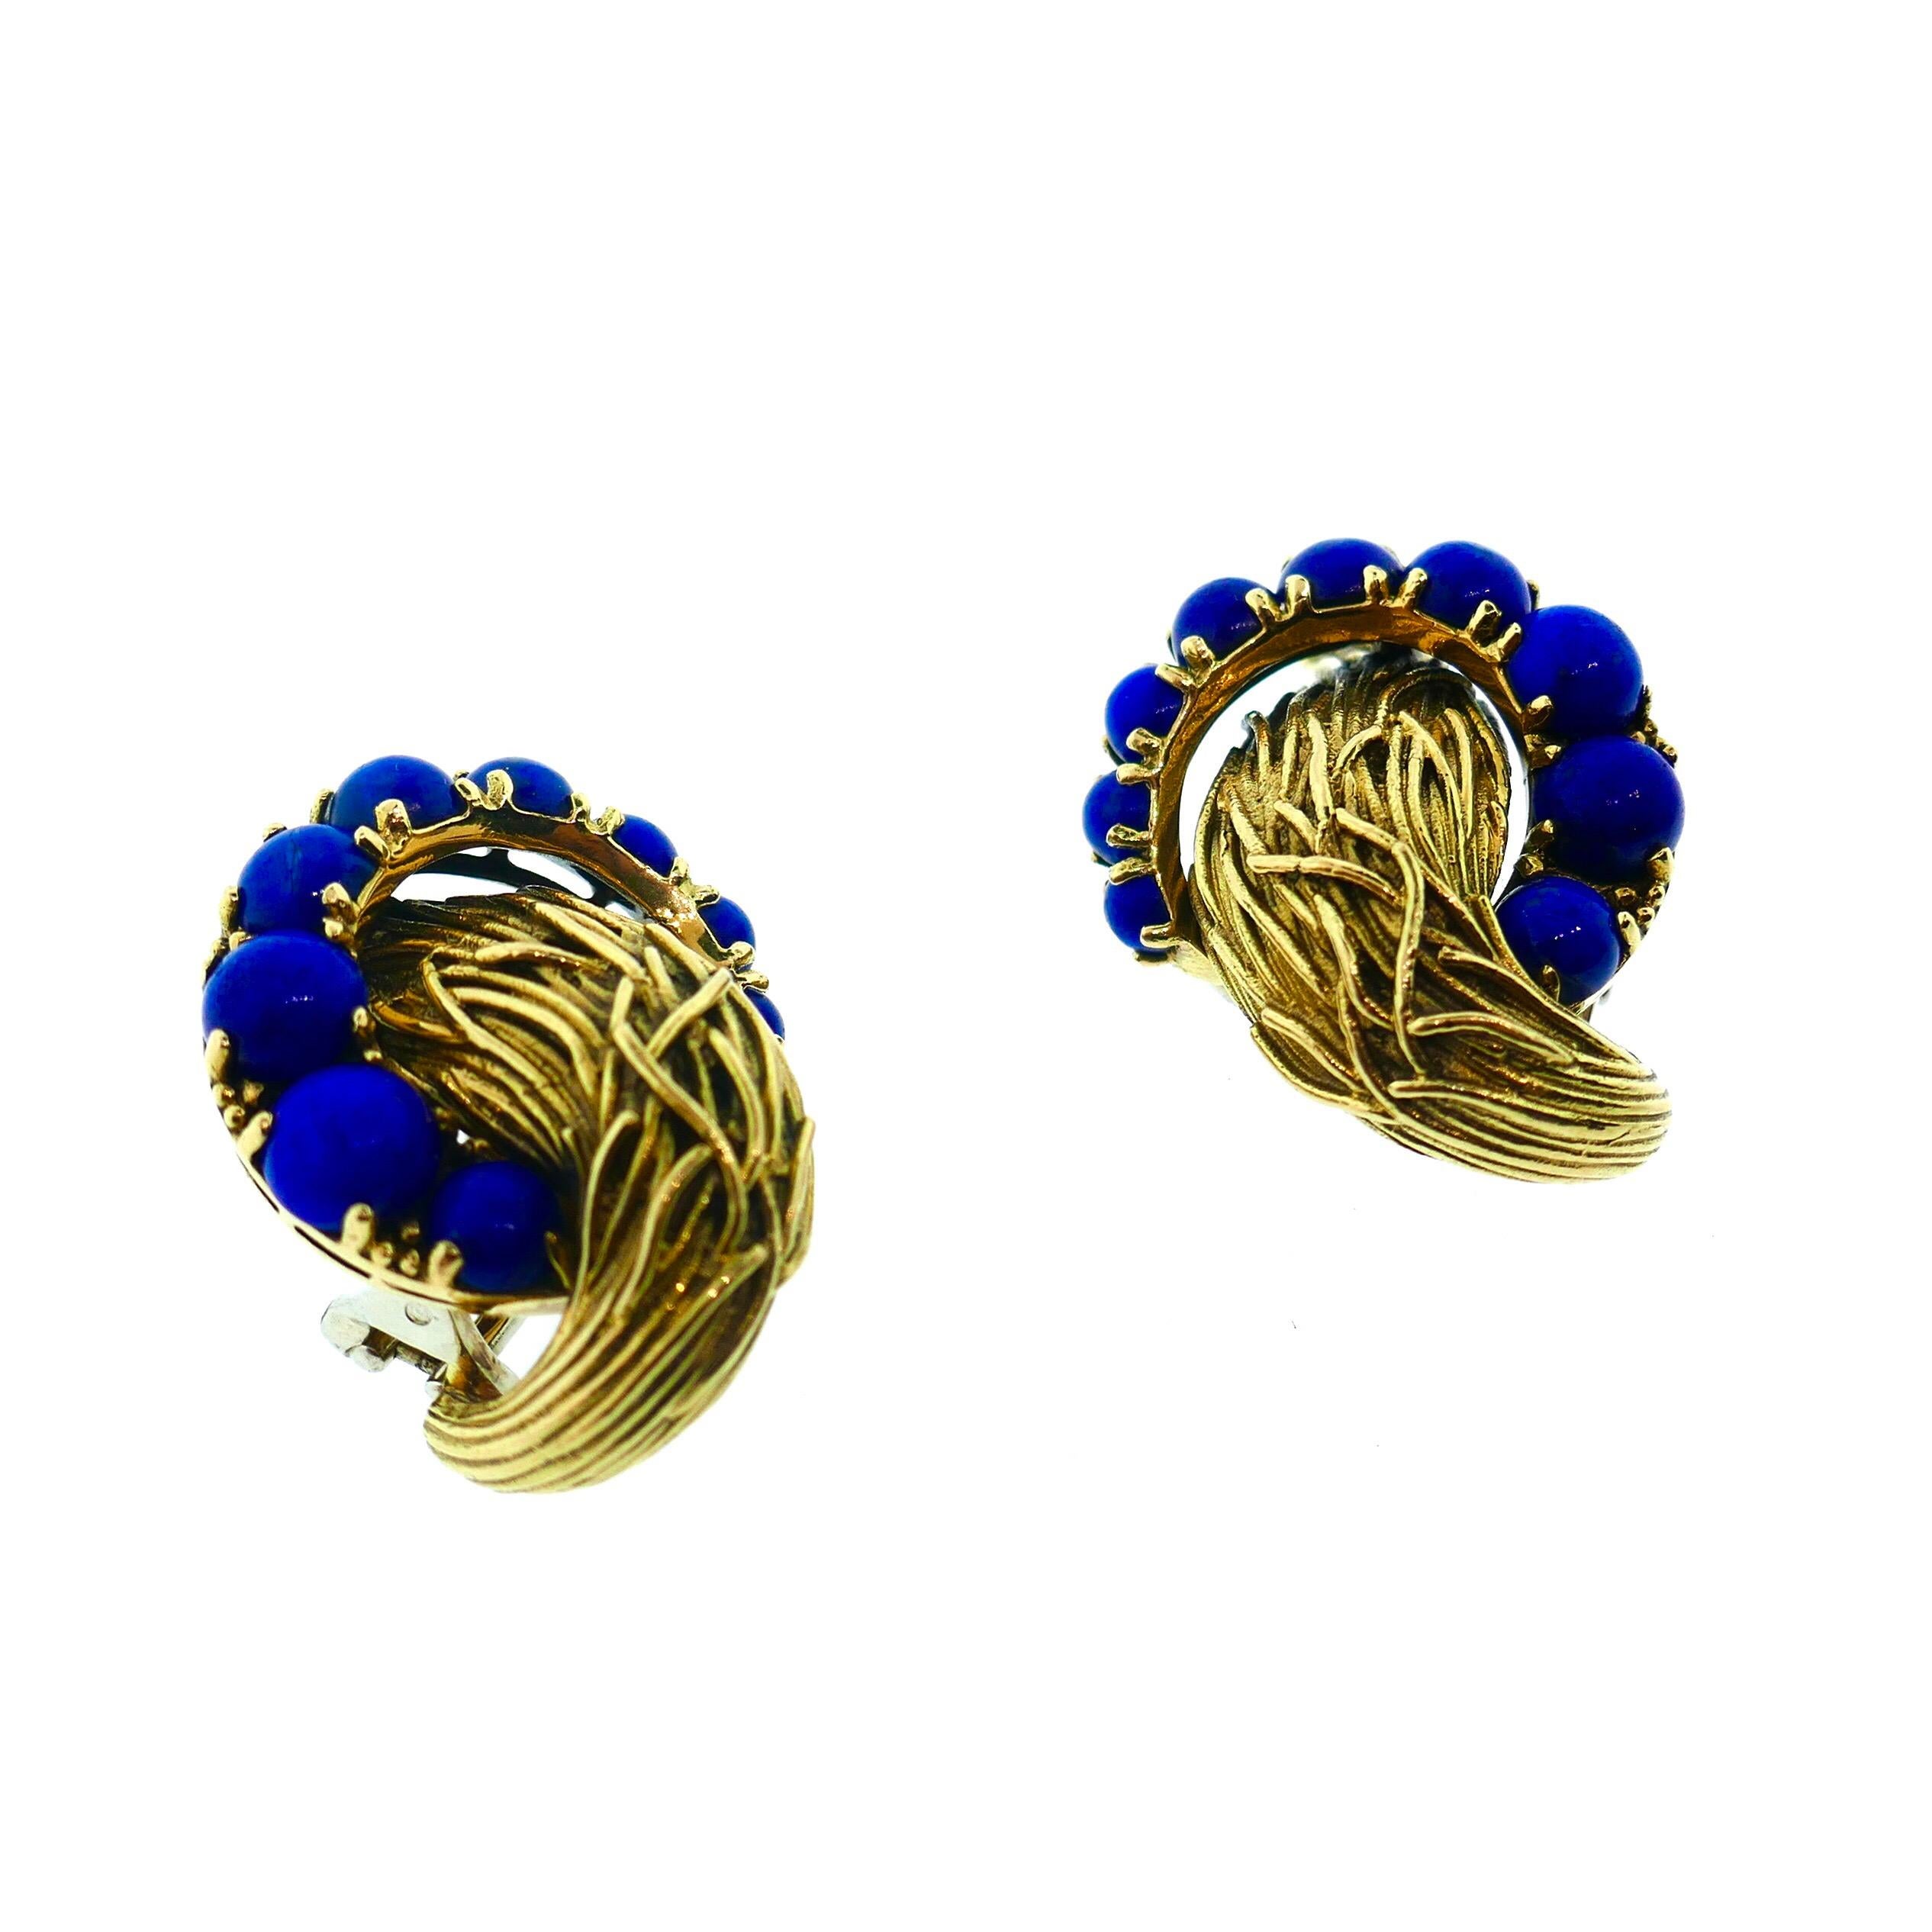 Pomellato Textured Yellow Gold Lapis Earrings

These are beautifully designed vintage Pomellato earrings. They feature 18 karat yellow textured gold and vibrant lapis in an intricate design with stunning detail. 

Weight: 22.6 Grams

Dimensions: